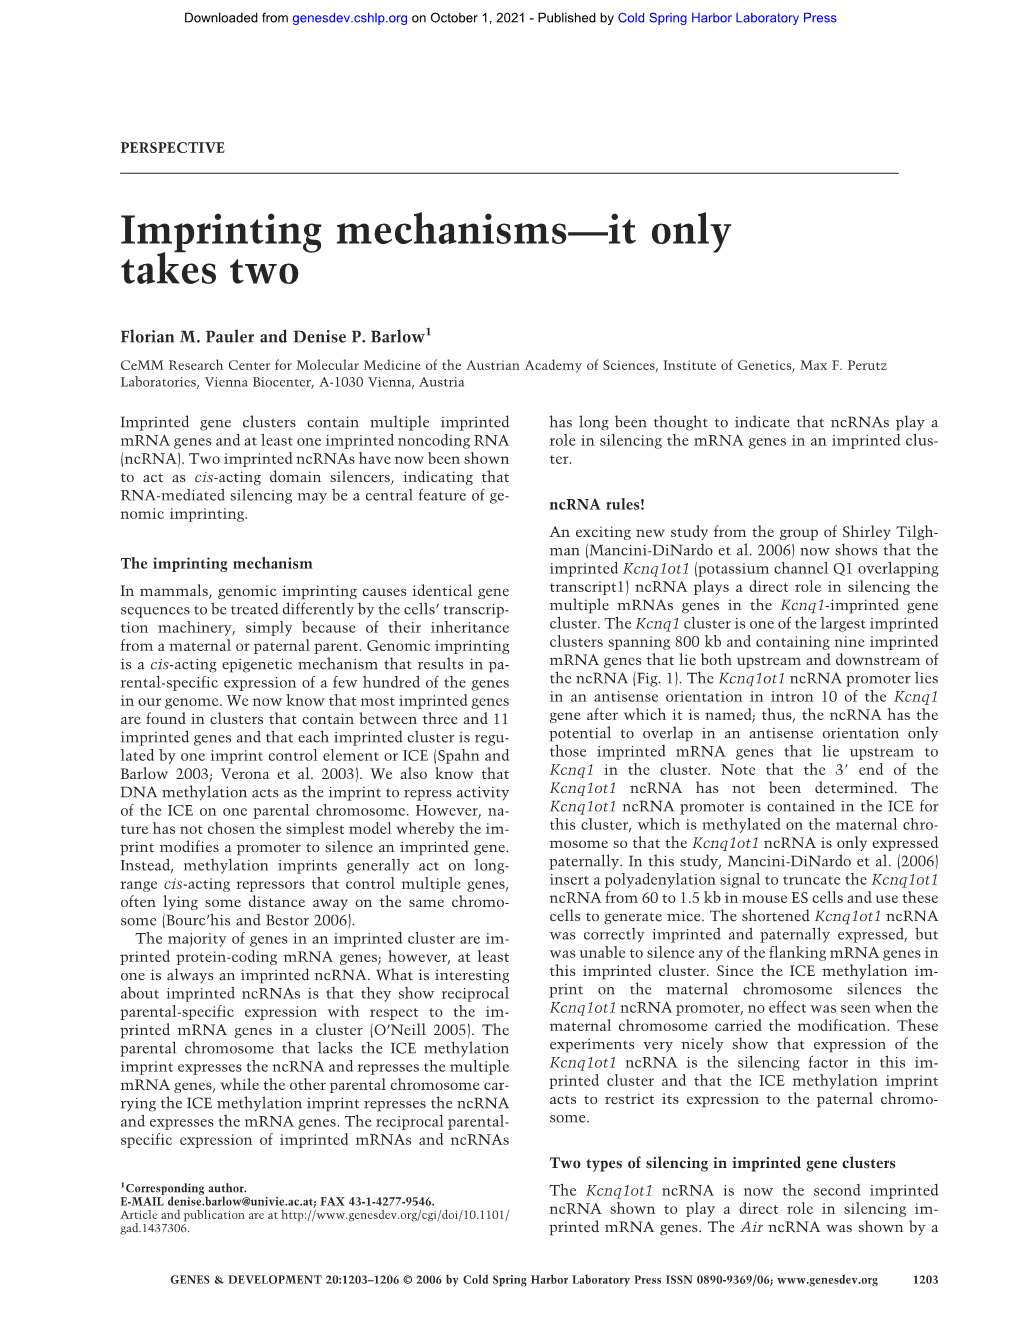 Imprinting Mechanisms—It Only Takes Two